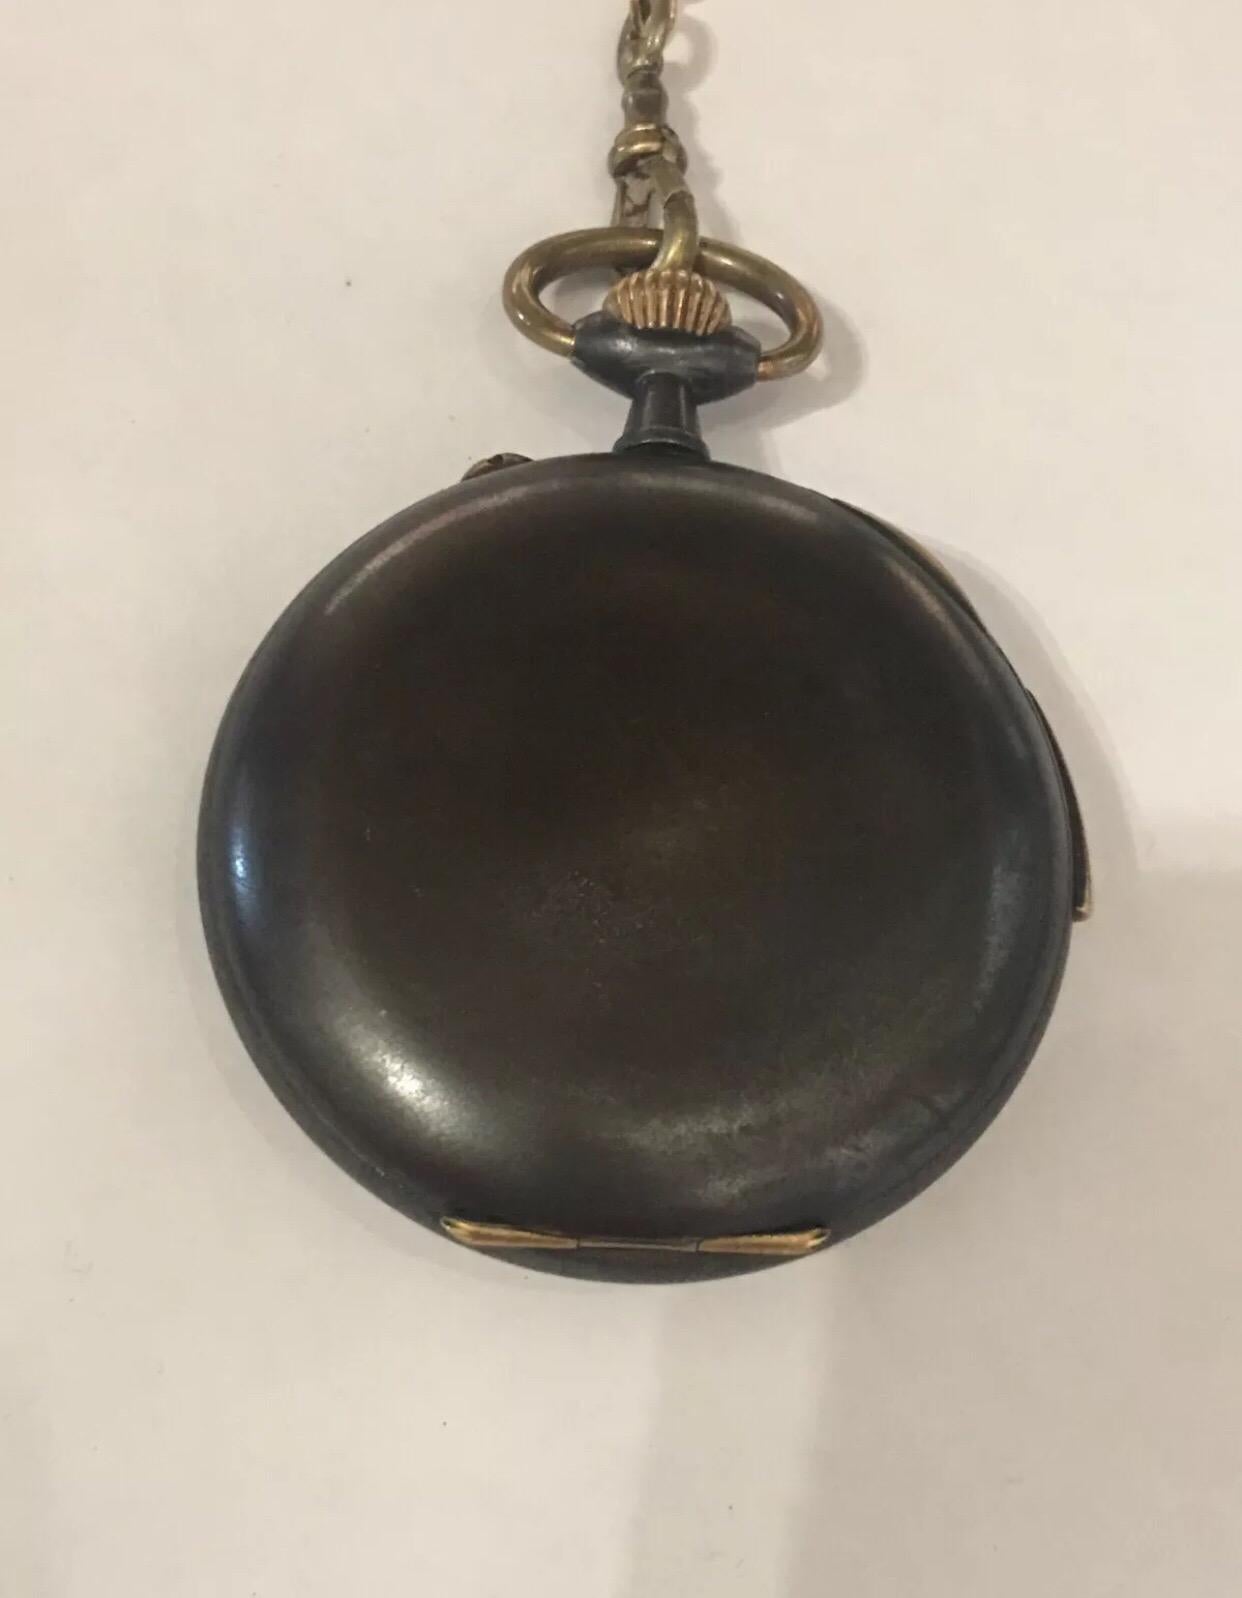 
JW Benson London Antique Gunmetal Quarter Repeater Pocket Watch Signed Invicta.

This Gunmetal watch is in good working condition and is ticking well. The repeater mechanism strikes on demand for a quarter and the hour.